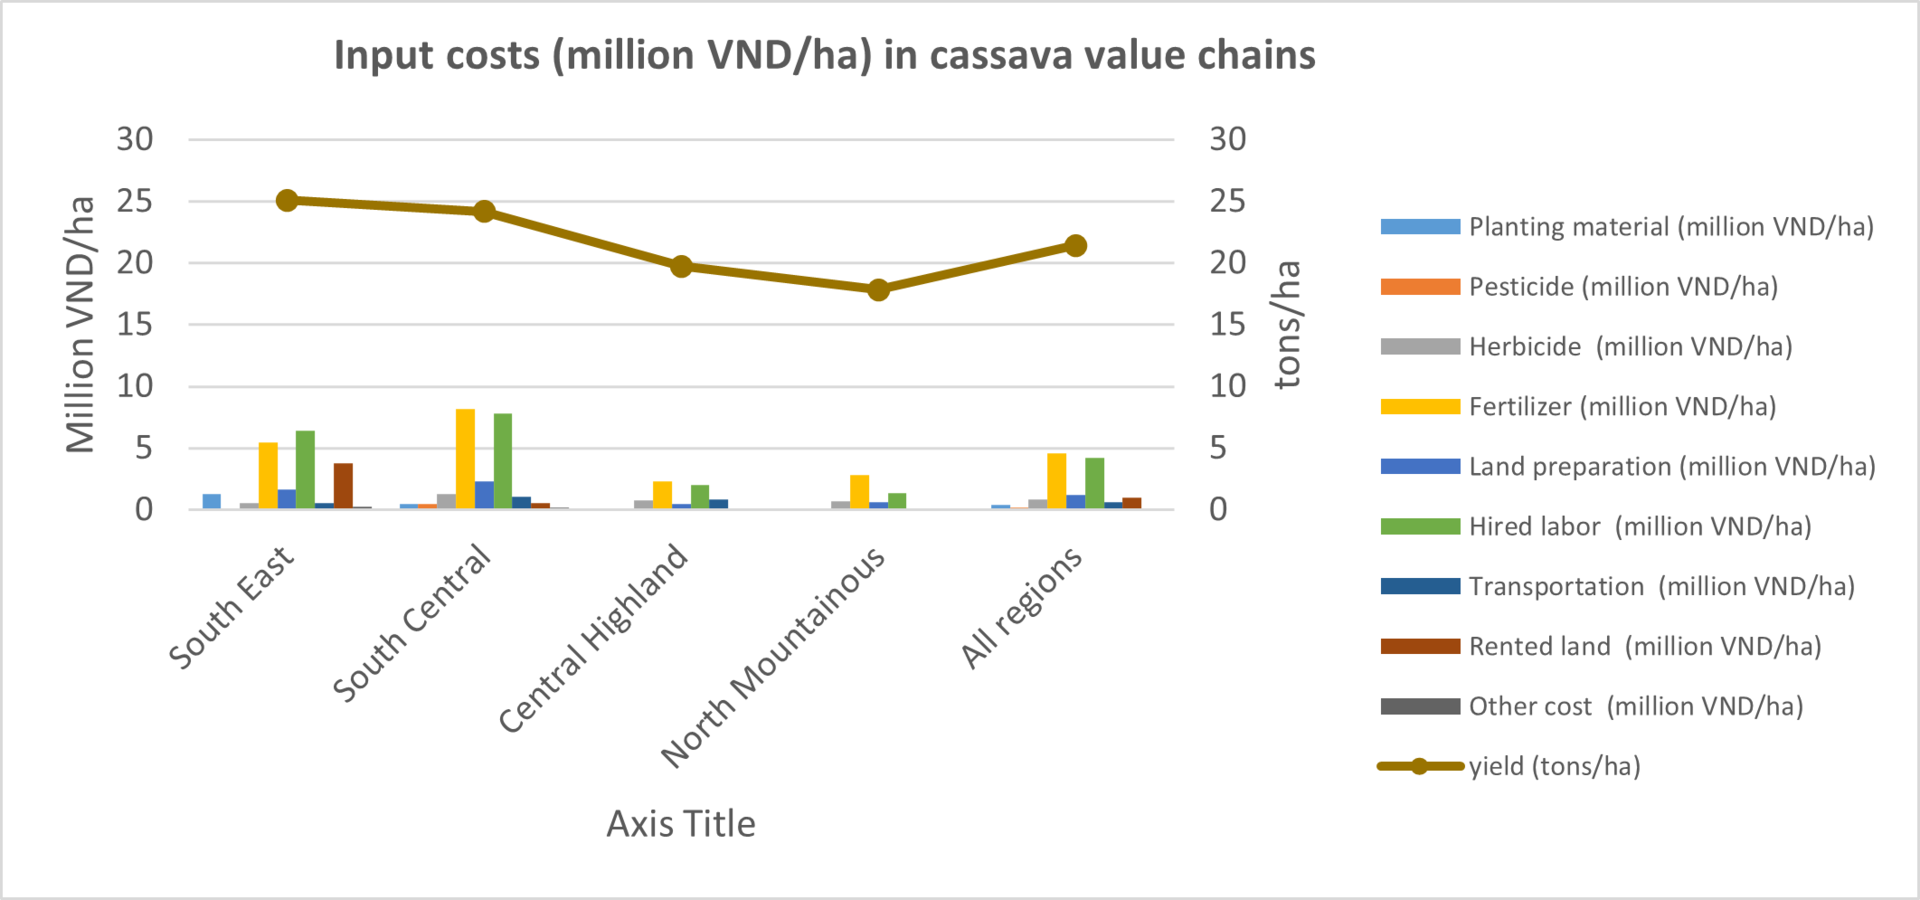 Figure 4: Inputs cost (million VND/ha) in cassava value chains, by provinces.